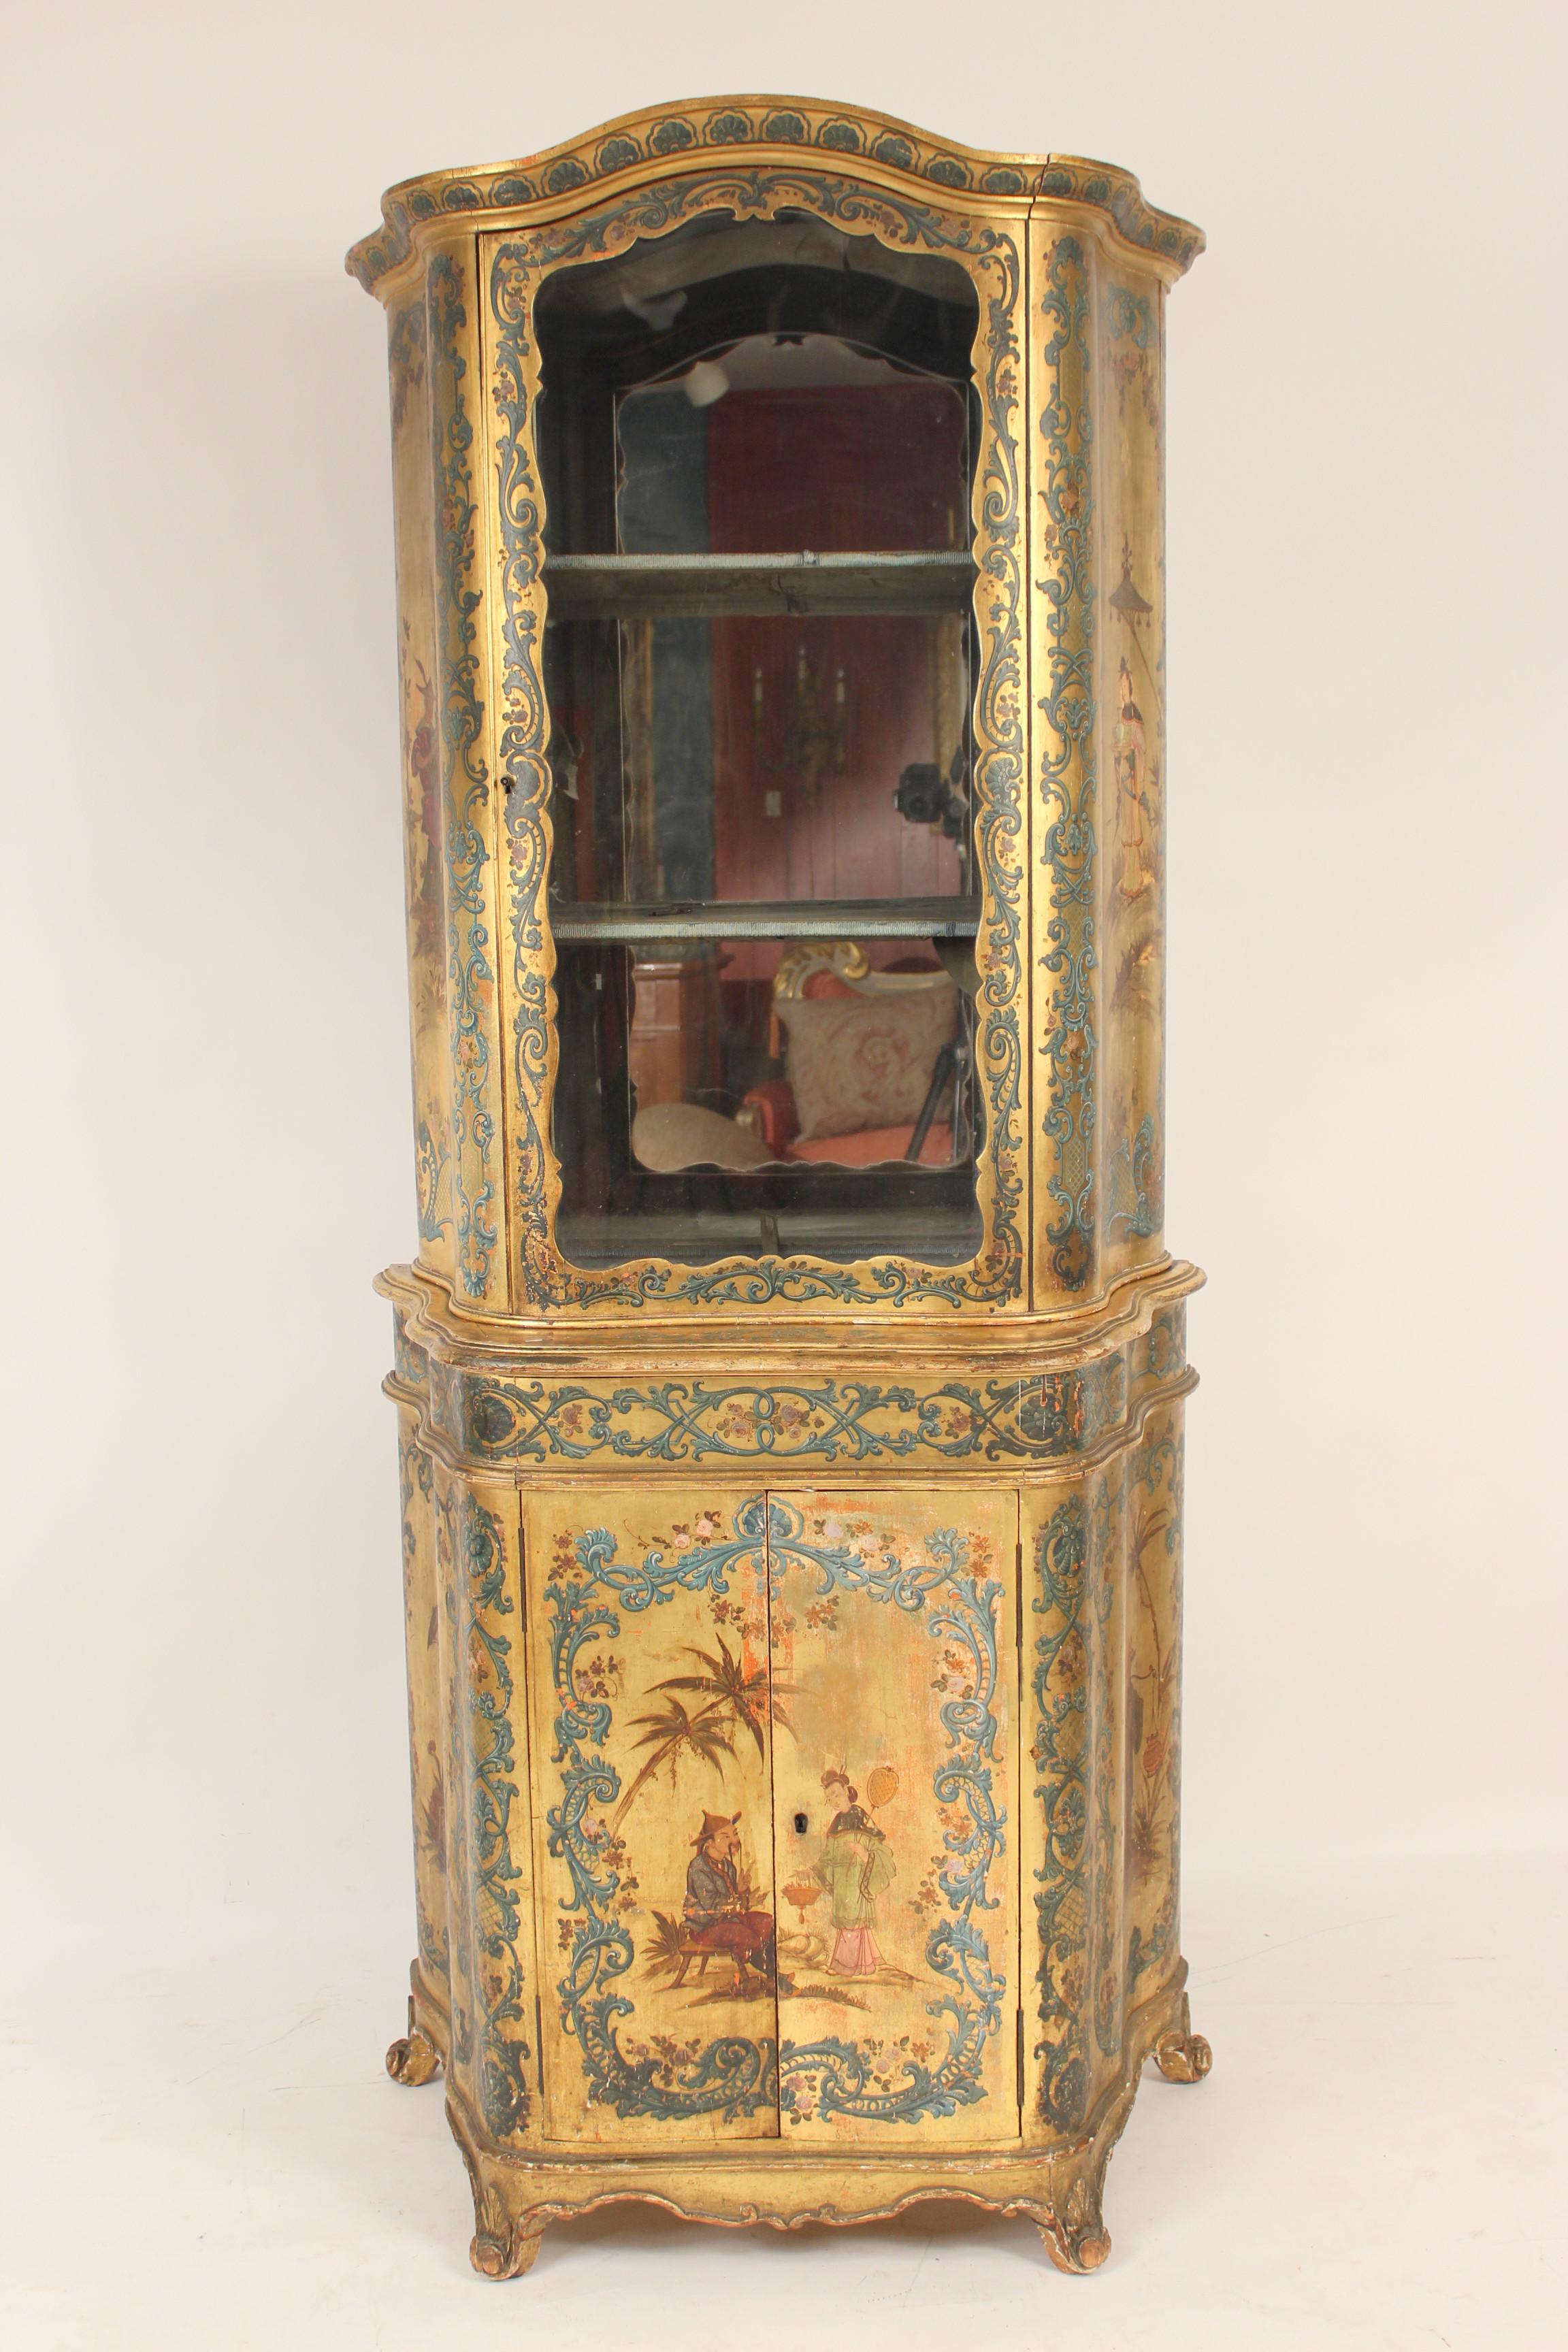 Italian Louis XV style chinoiserie and gilt decorated display cabinet with a concave glass door, circa 1900. The decoration on the lower right hand side door has been rubbed and is lighter in color than the left door.